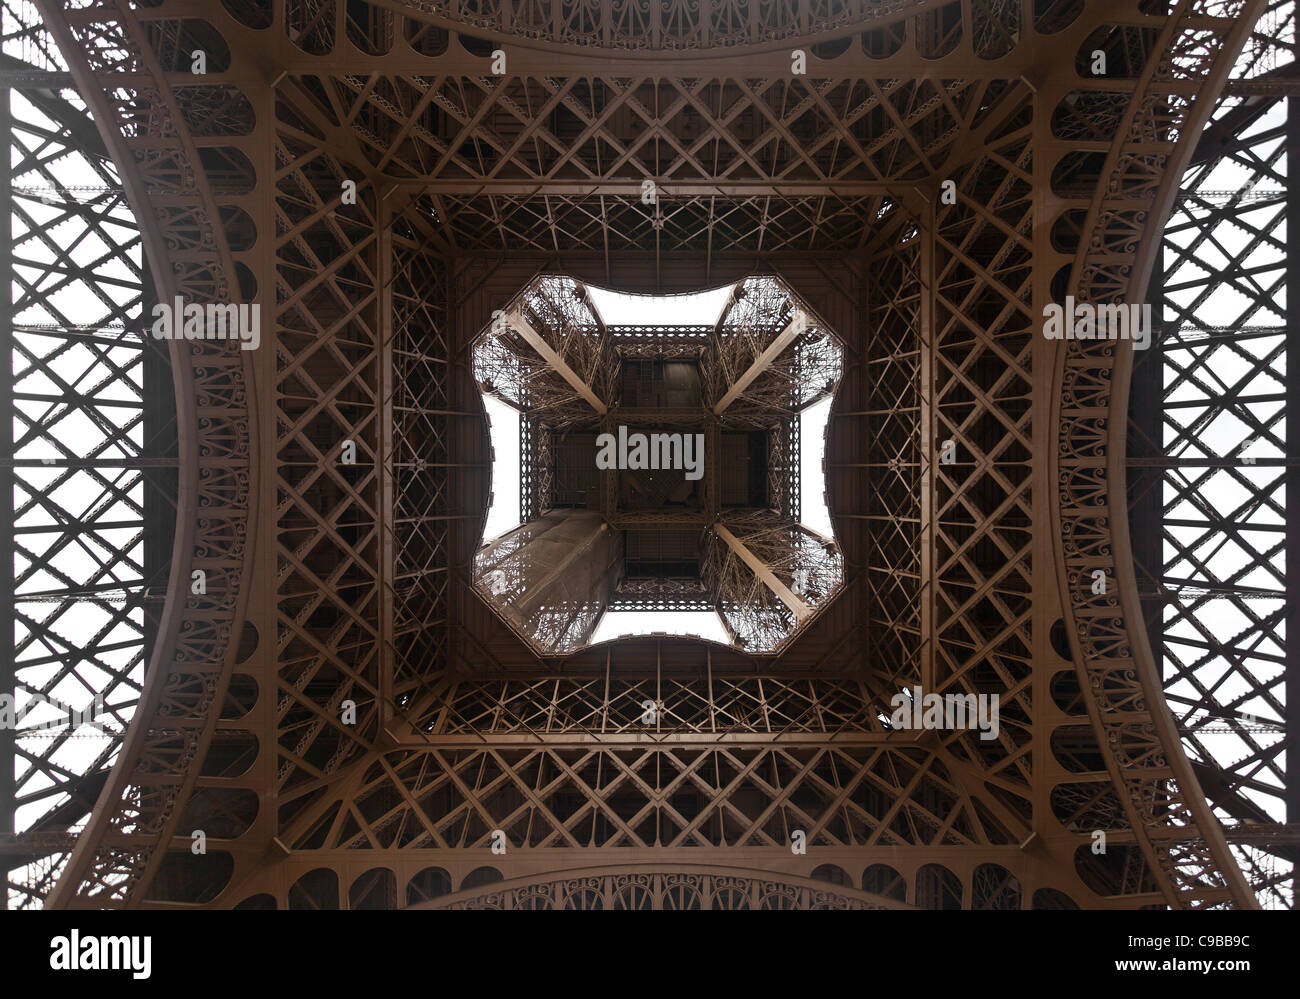 Ventral view of the Eiffel tower looking up through the ironworks Stock Photo